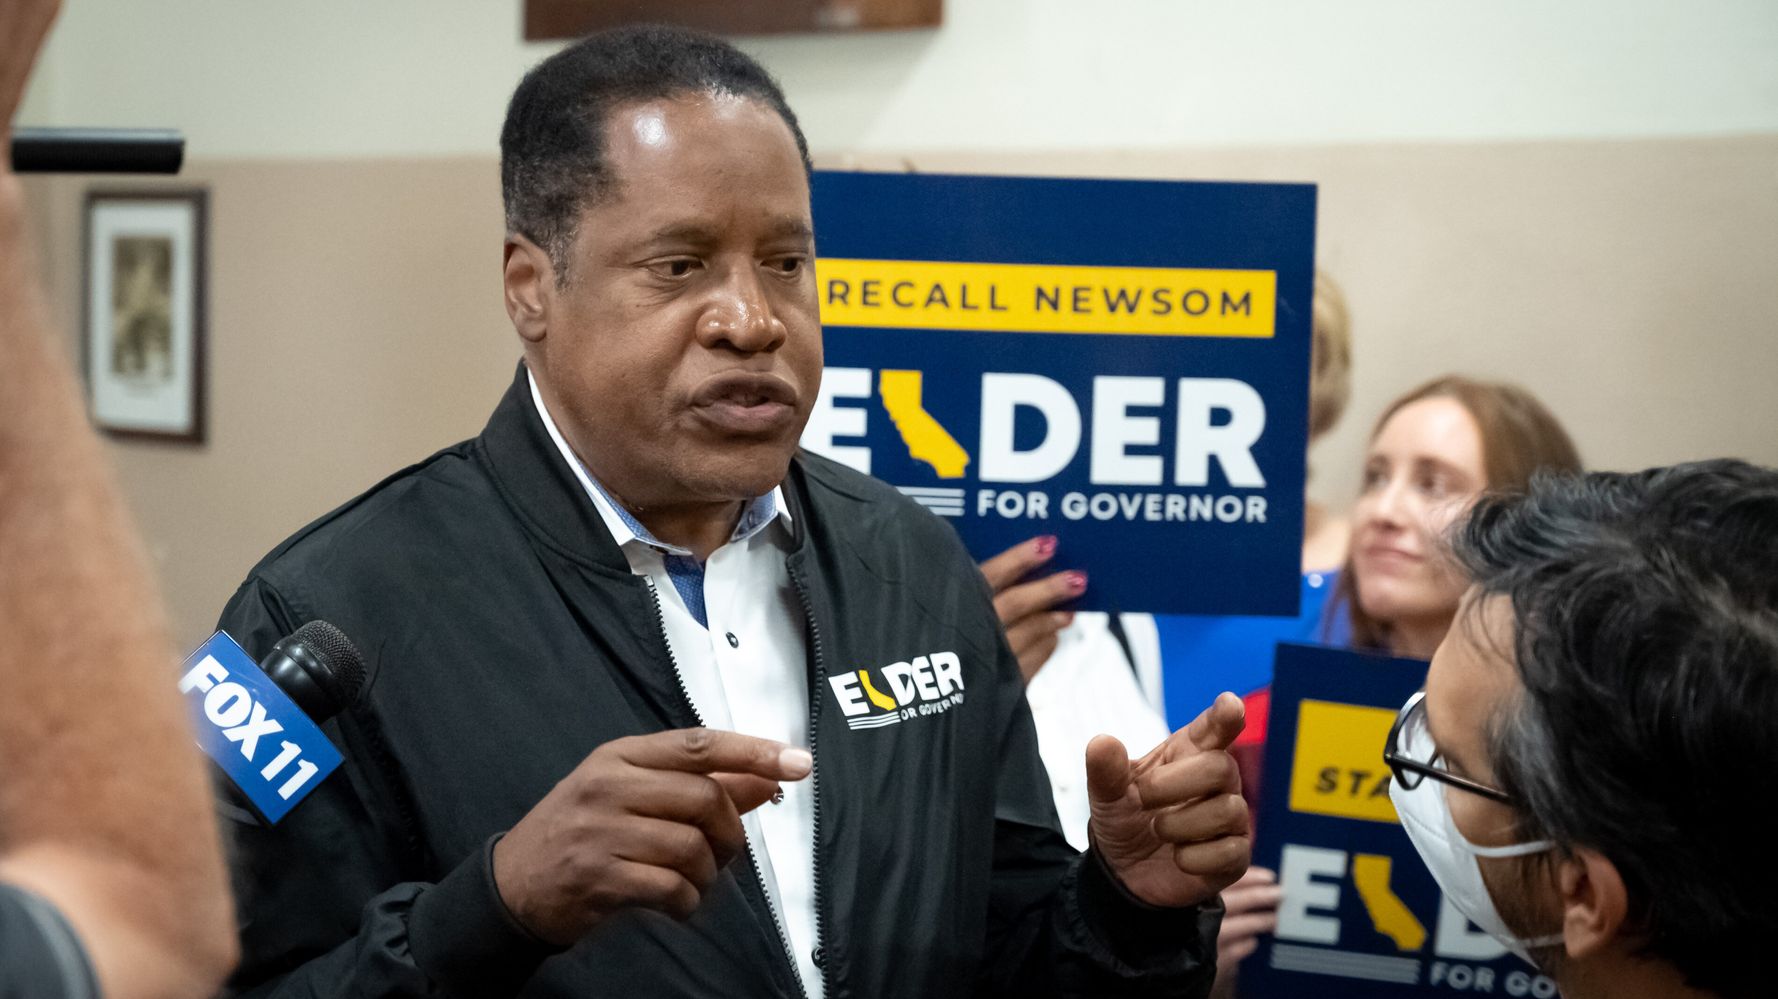 Larry Elder Rails Against ‘Twisted Results’ BEFORE California Recall Election